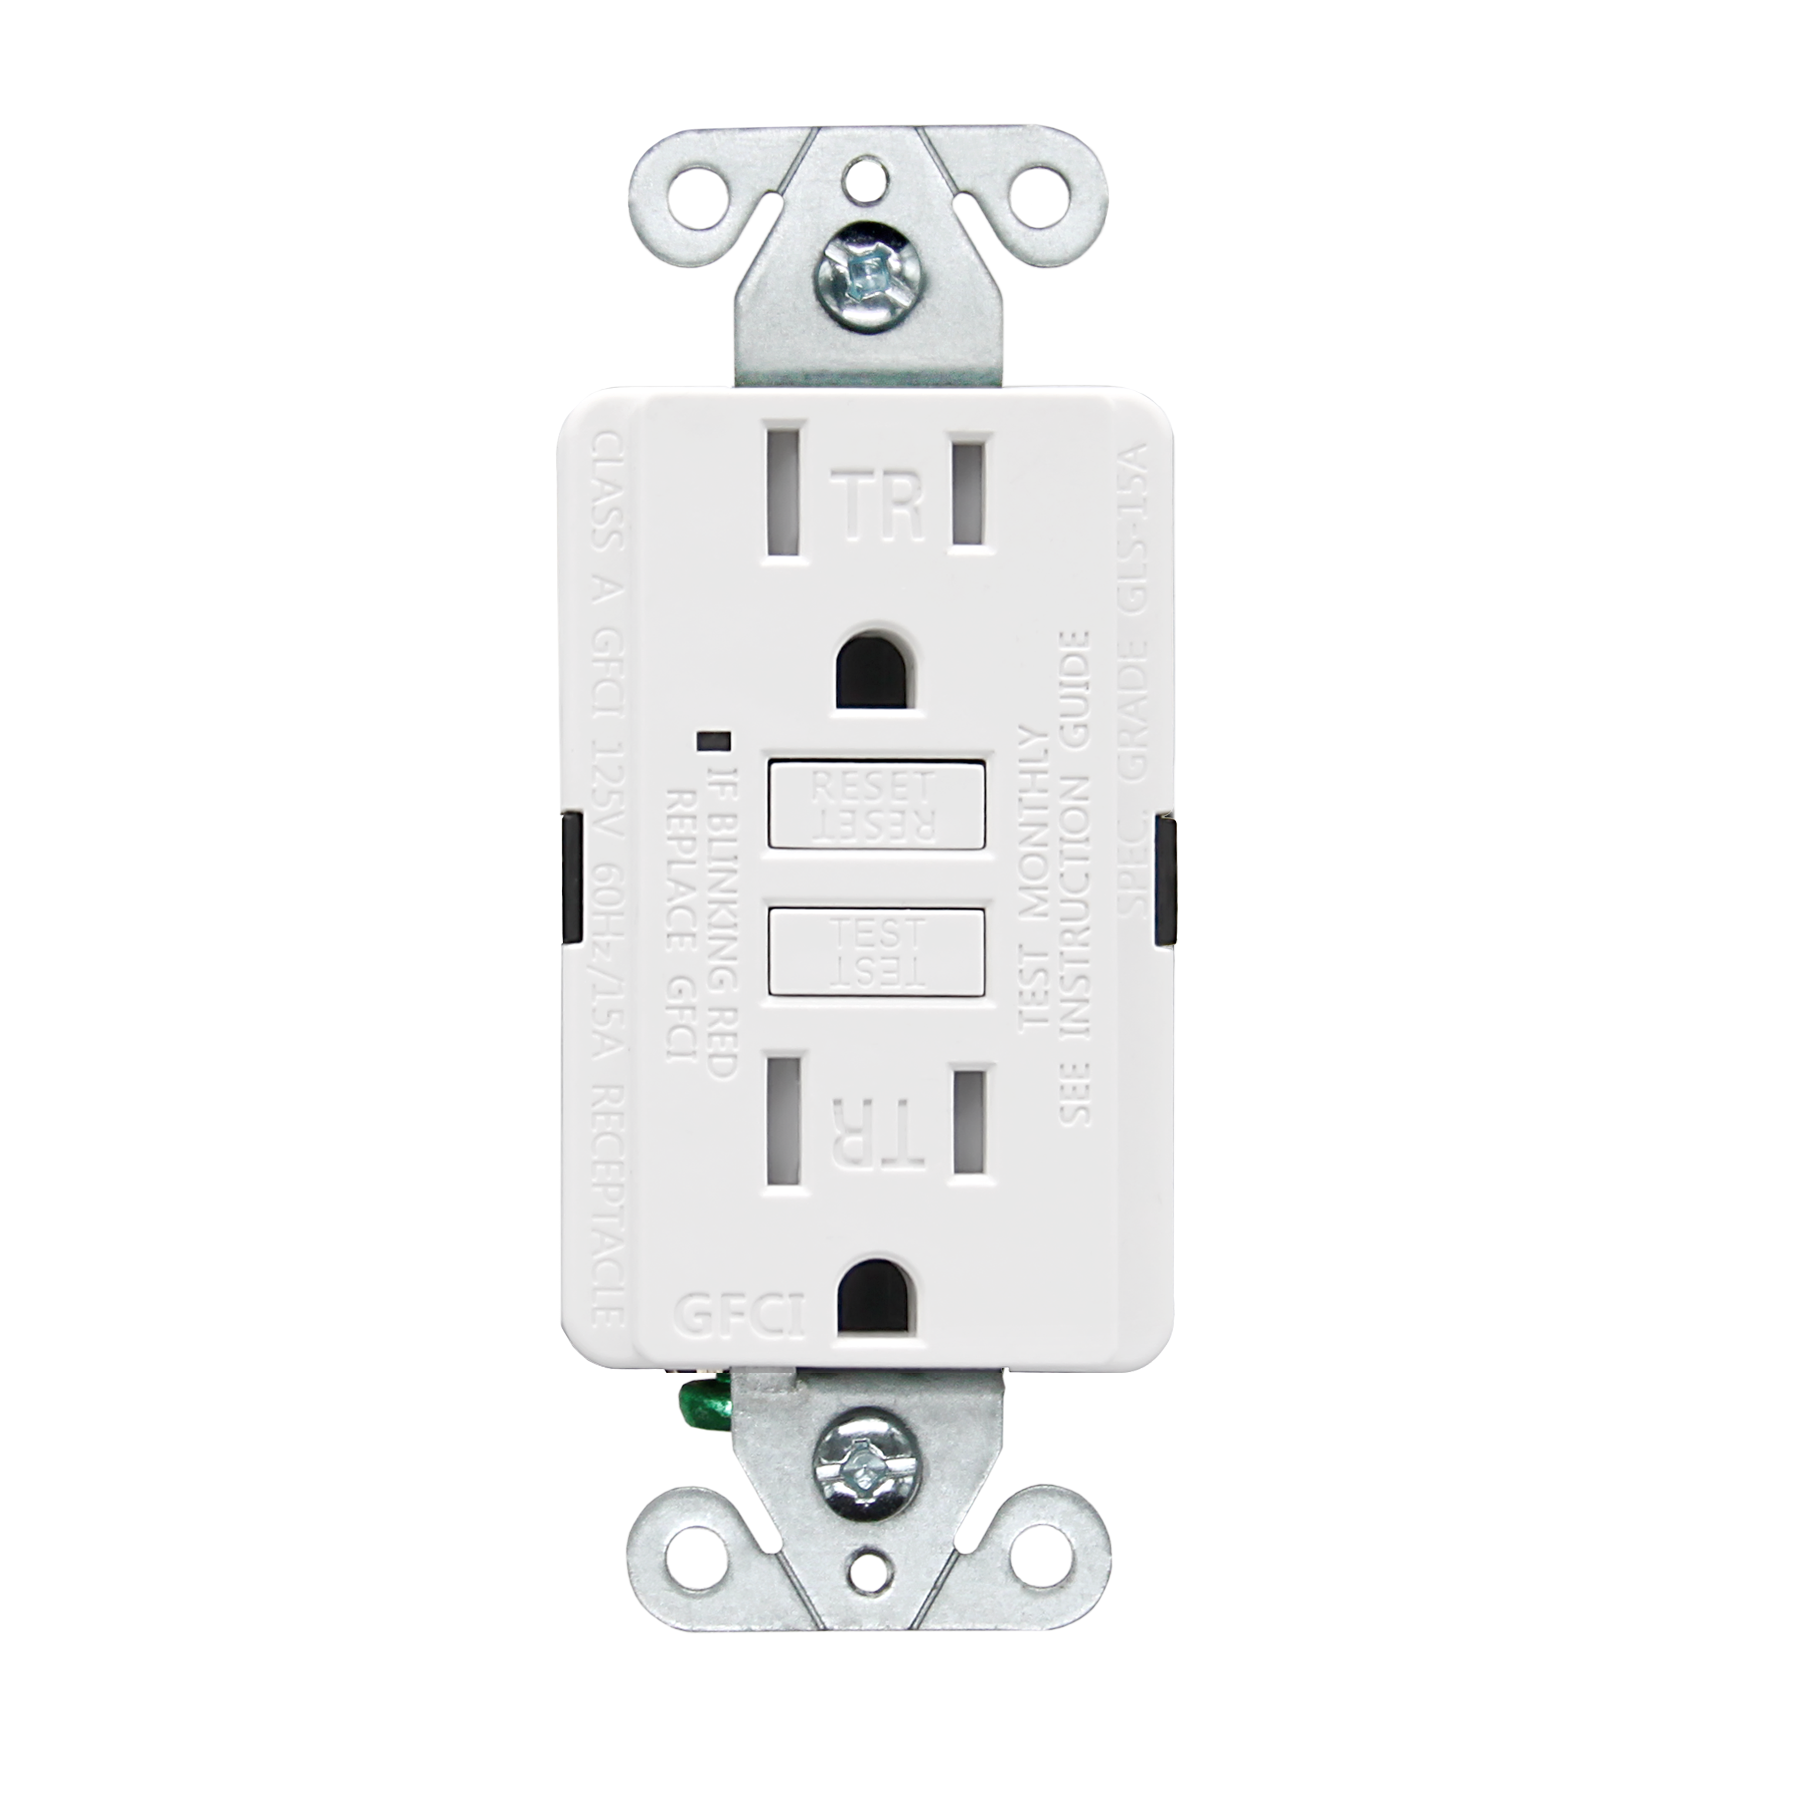 Faith UL Listed America 15A Electrical High Quality Duplex GFCI Tamper Resistant Receptacles Featured Image